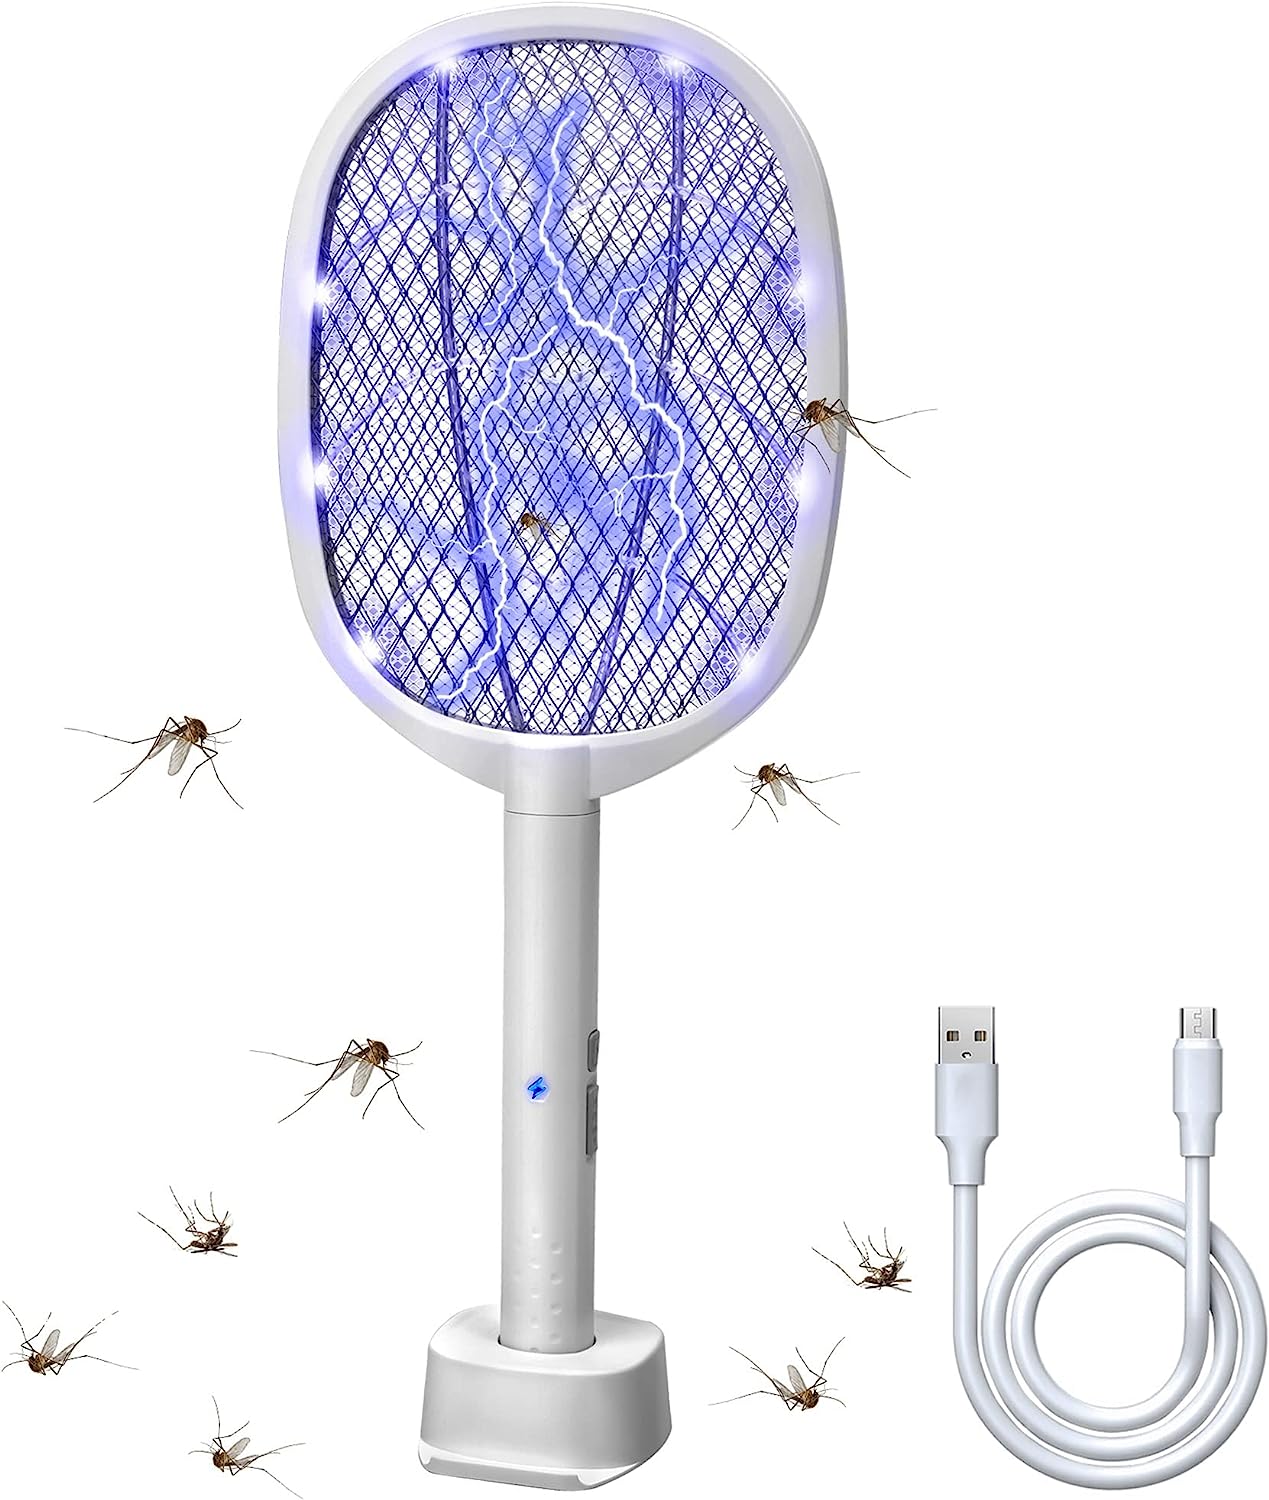 Insect-Trap™ | The 2-in-1 mosquito swatter and seduction trap!